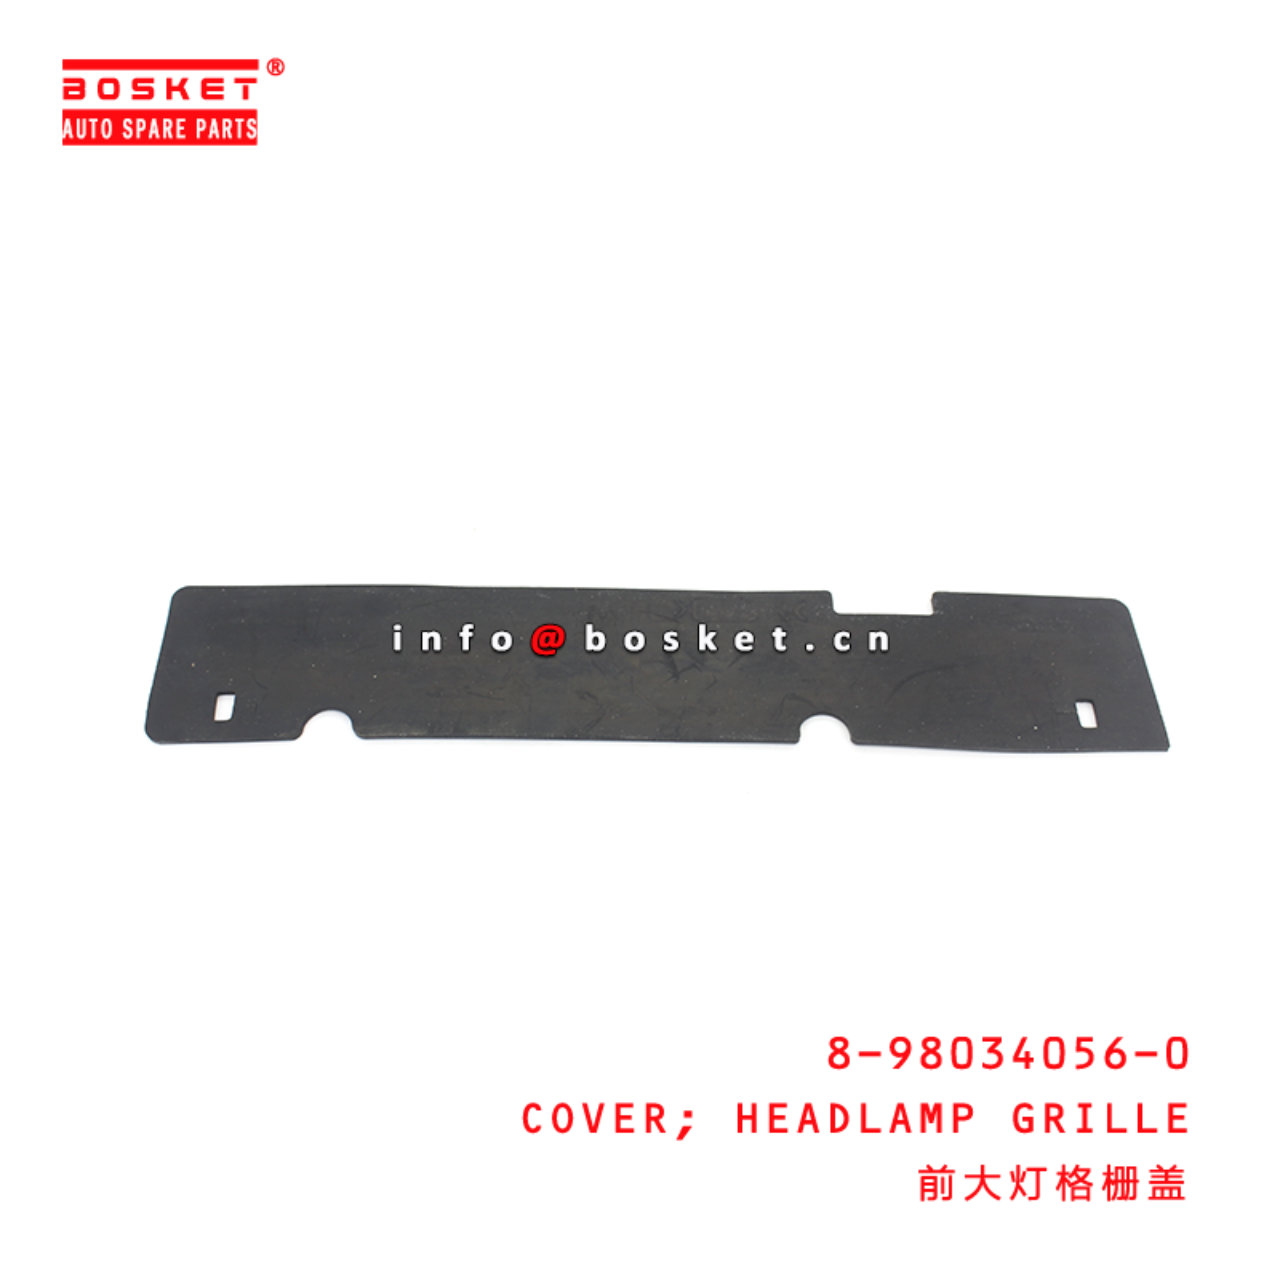 8-98034056-0 Headlamp Grille Cover suitable for ISUZU 8980340560